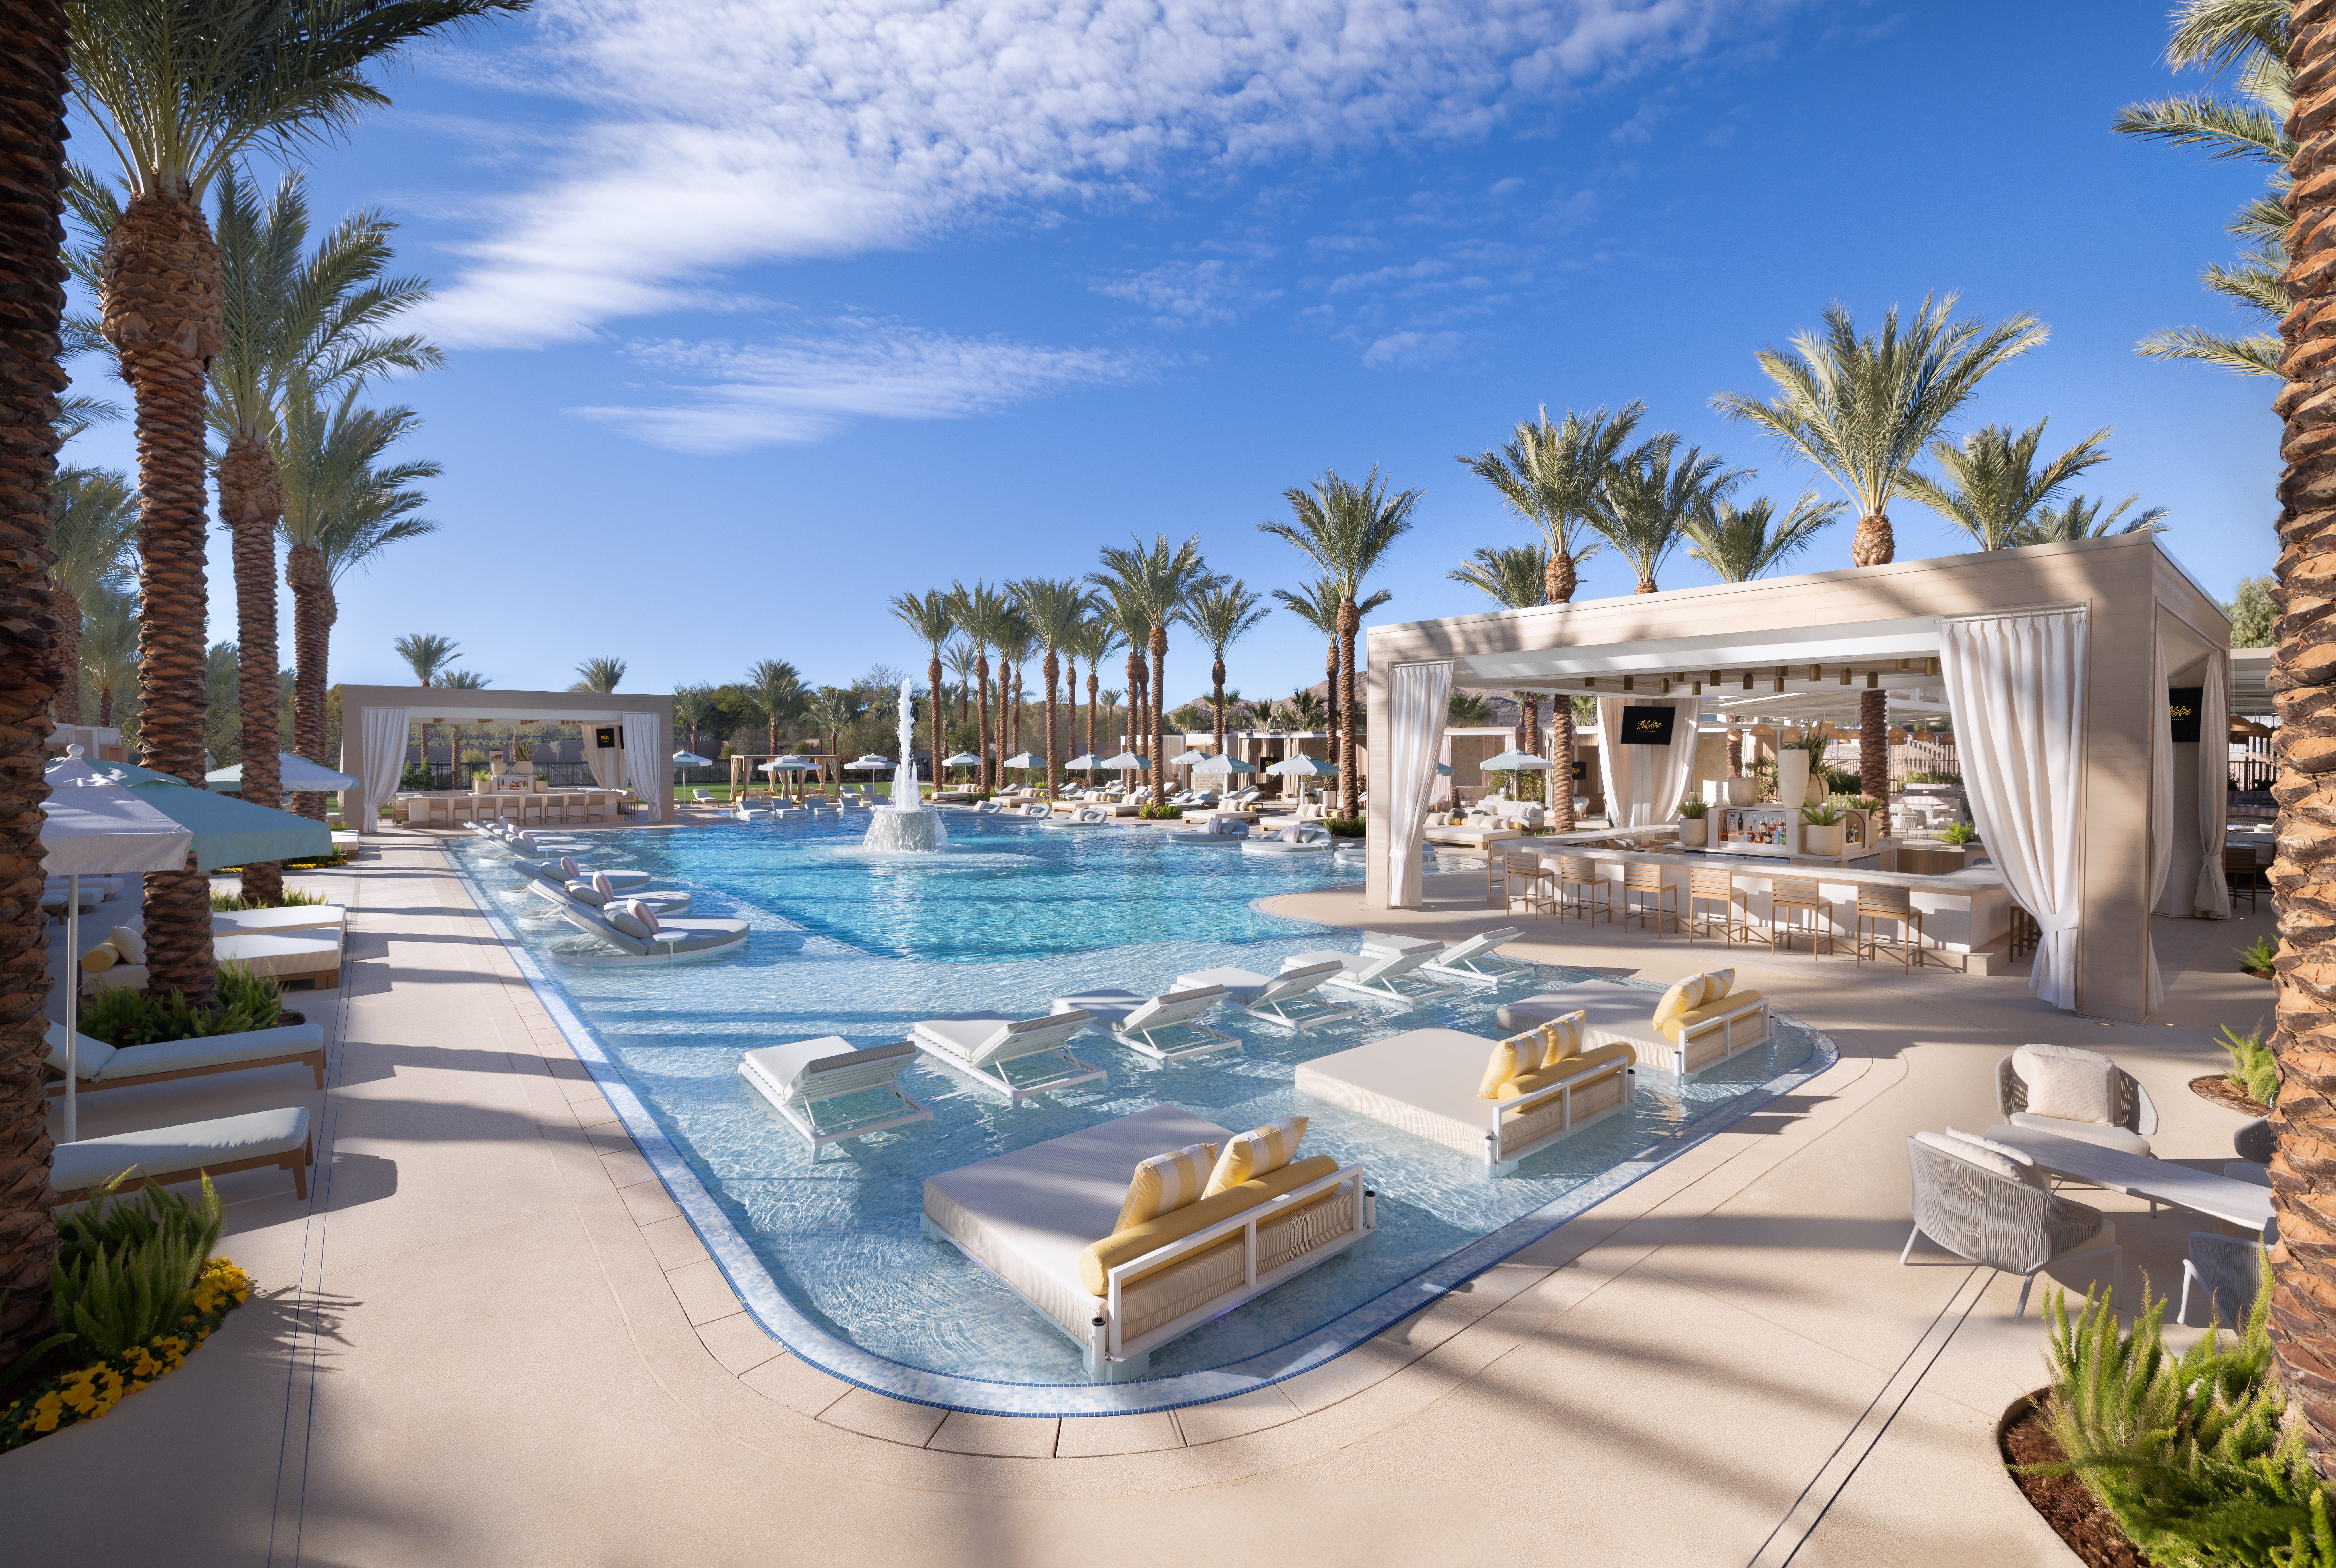 A pool with lounges and cabanas.